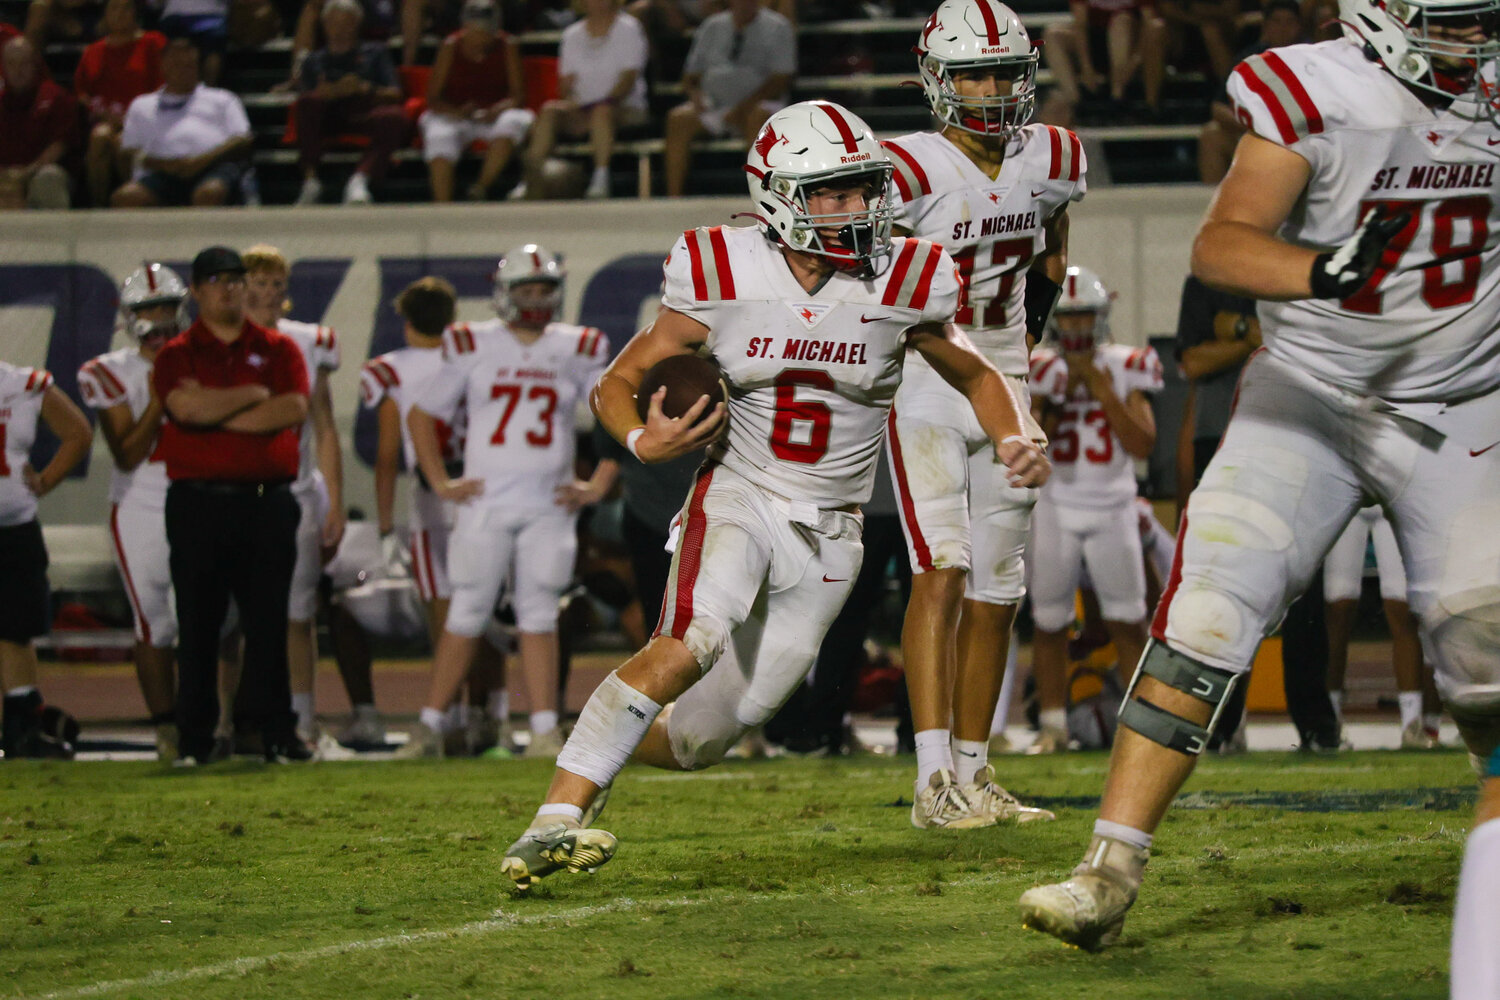 St. Michael sophomore Nick Russo eyes open field on a carry Thursday night at the Gulf Shores Sportsplex during the Cardinals’ first game of the season.